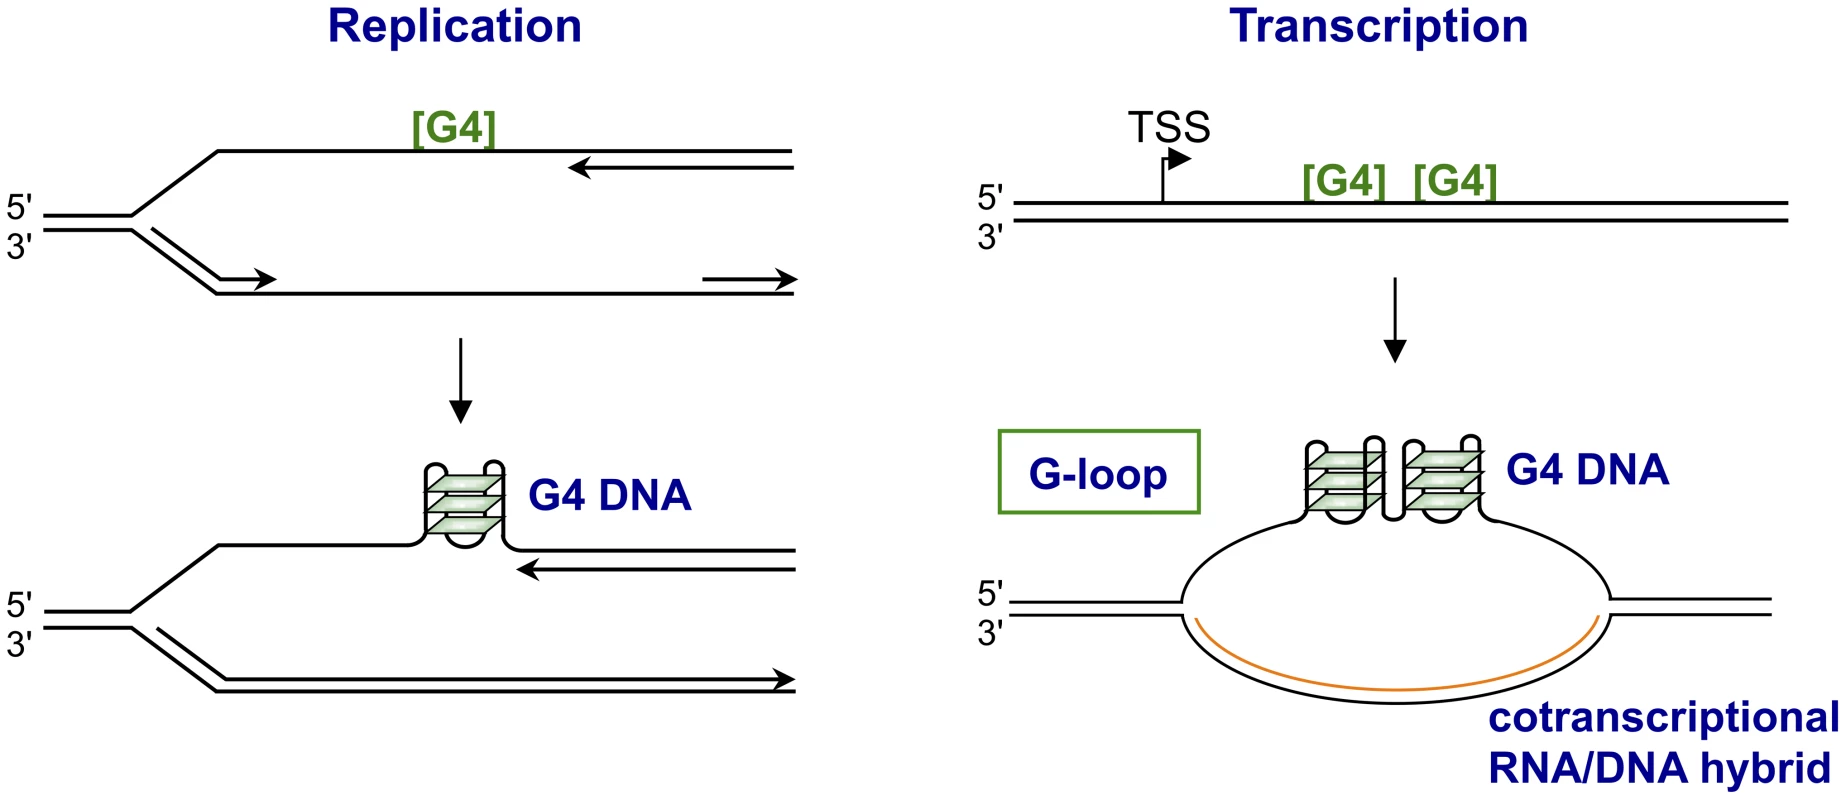 Structures form upon replication or transcription of regions bearing G4 motifs.